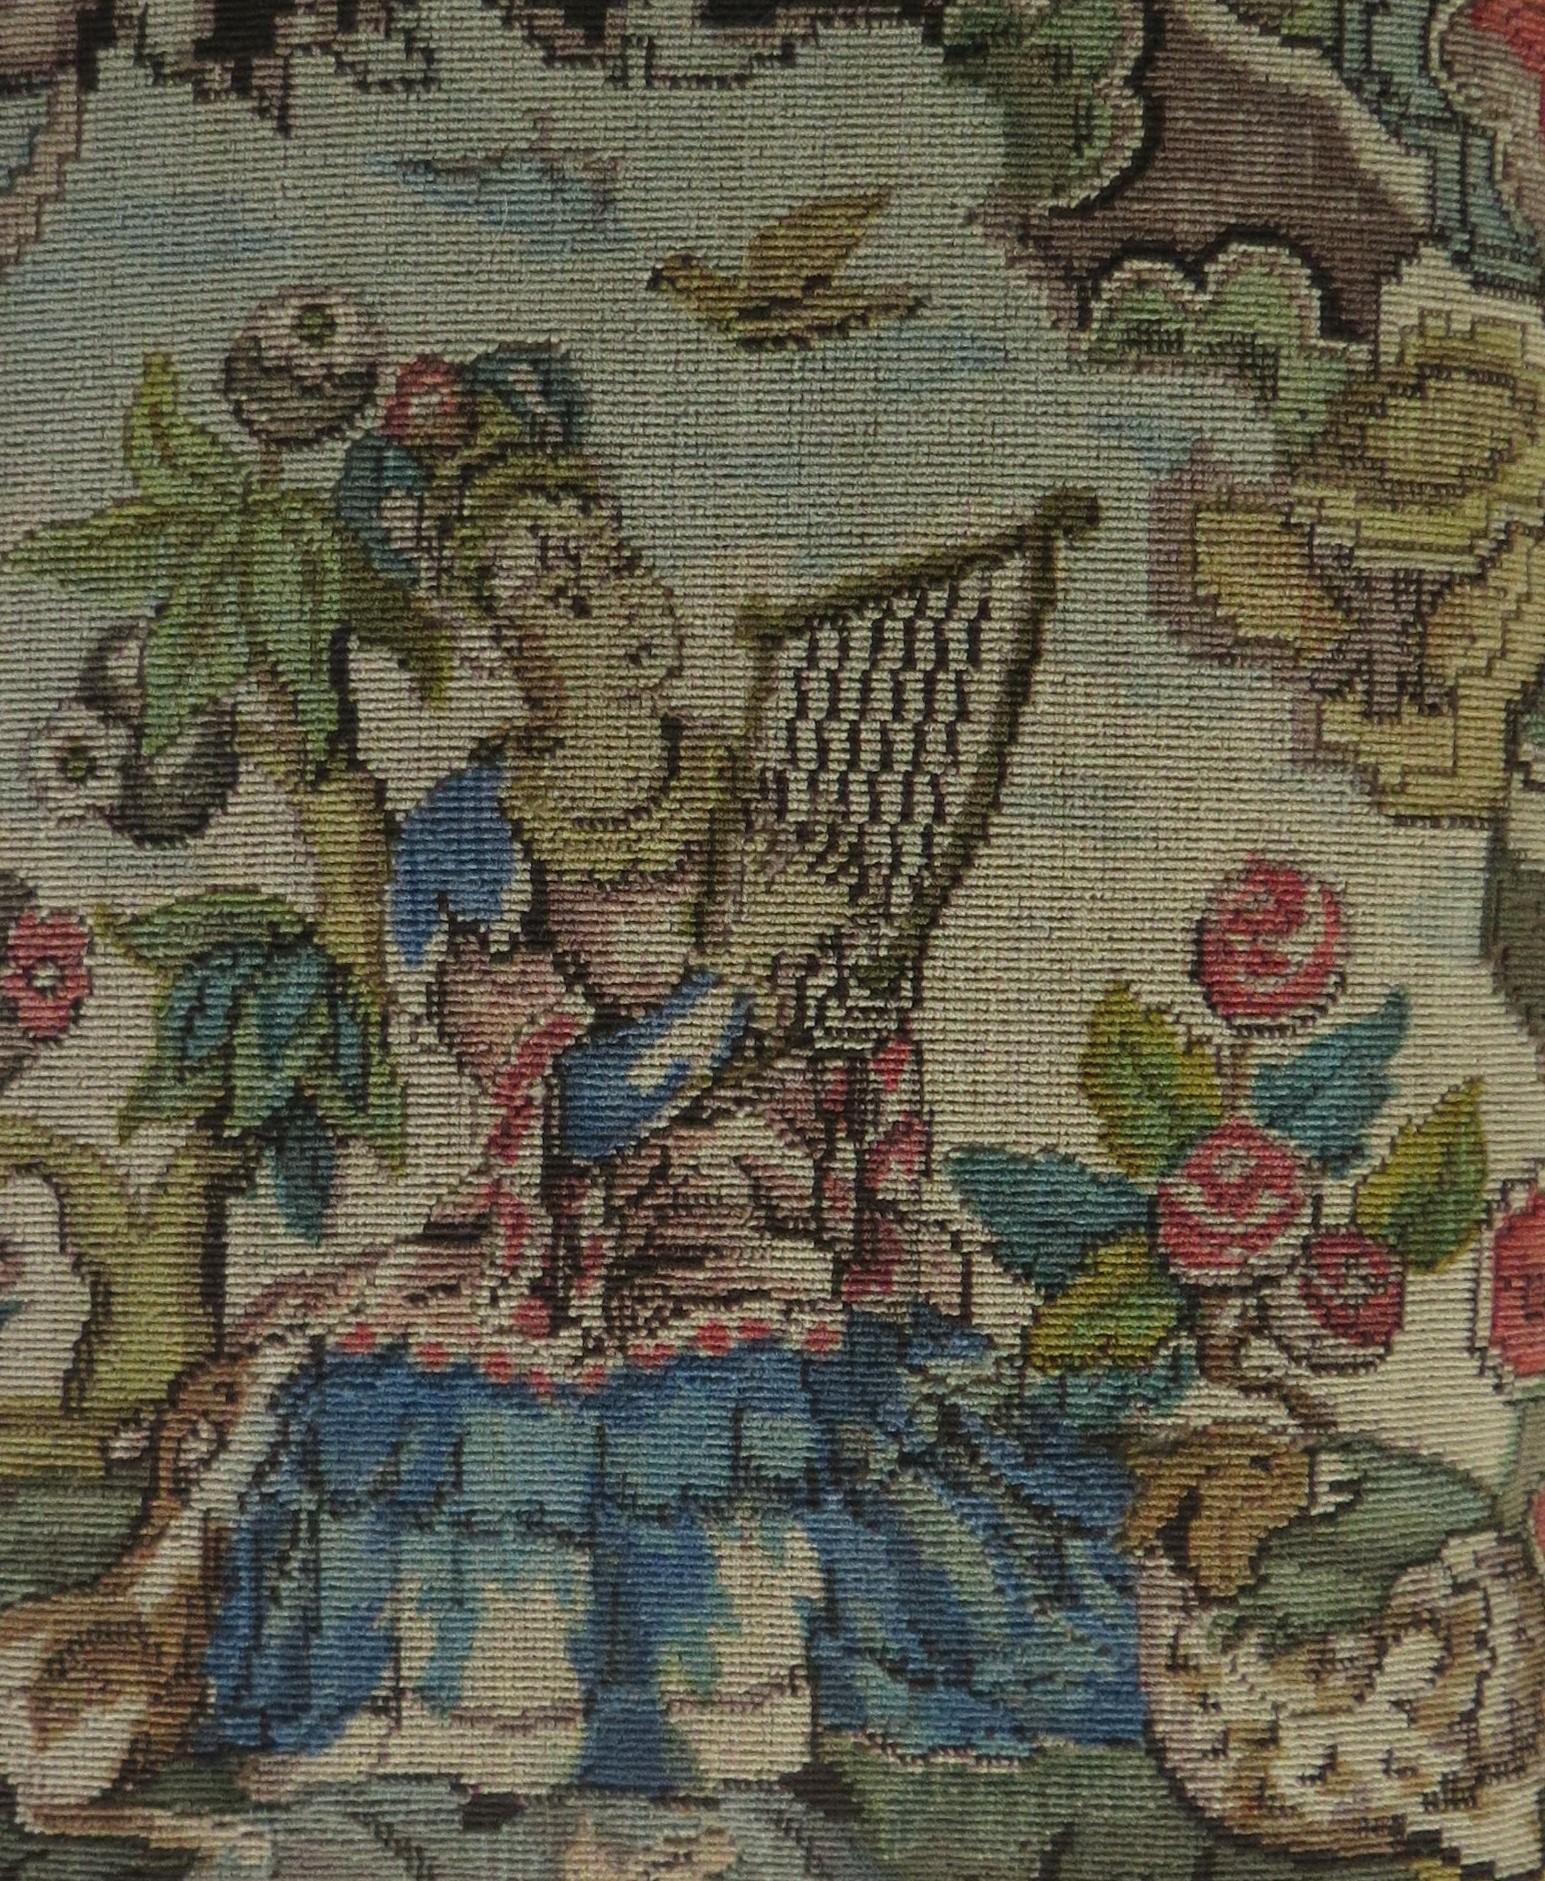 Woven Tapestry Cushion or Pillow in Aubusson style, French, 19th Century 5